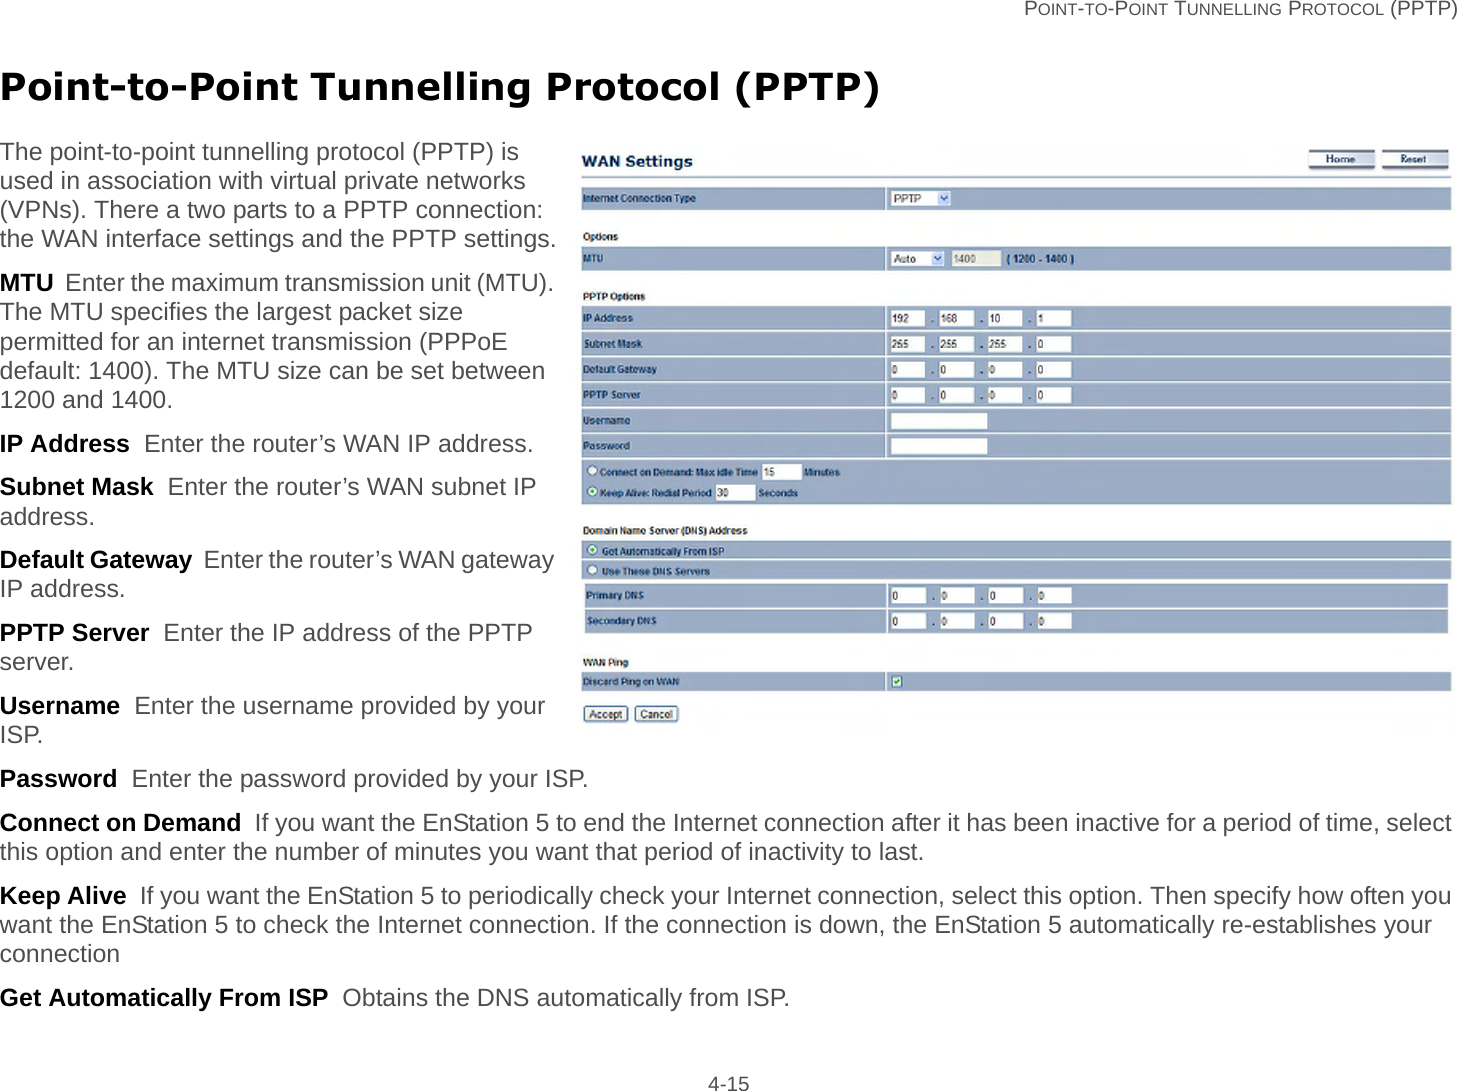   POINT-TO-POINT TUNNELLING PROTOCOL (PPTP) 4-15Point-to-Point Tunnelling Protocol (PPTP)The point-to-point tunnelling protocol (PPTP) is used in association with virtual private networks (VPNs). There a two parts to a PPTP connection: the WAN interface settings and the PPTP settings.MTU  Enter the maximum transmission unit (MTU). The MTU specifies the largest packet size permitted for an internet transmission (PPPoE default: 1400). The MTU size can be set between 1200 and 1400.IP Address  Enter the router’s WAN IP address.Subnet Mask  Enter the router’s WAN subnet IP address.Default Gateway  Enter the router’s WAN gateway IP address.PPTP Server  Enter the IP address of the PPTP server.Username  Enter the username provided by your ISP.Password  Enter the password provided by your ISP.Connect on Demand  If you want the EnStation 5 to end the Internet connection after it has been inactive for a period of time, select this option and enter the number of minutes you want that period of inactivity to last.Keep Alive  If you want the EnStation 5 to periodically check your Internet connection, select this option. Then specify how often you want the EnStation 5 to check the Internet connection. If the connection is down, the EnStation 5 automatically re-establishes your connectionGet Automatically From ISP  Obtains the DNS automatically from ISP.